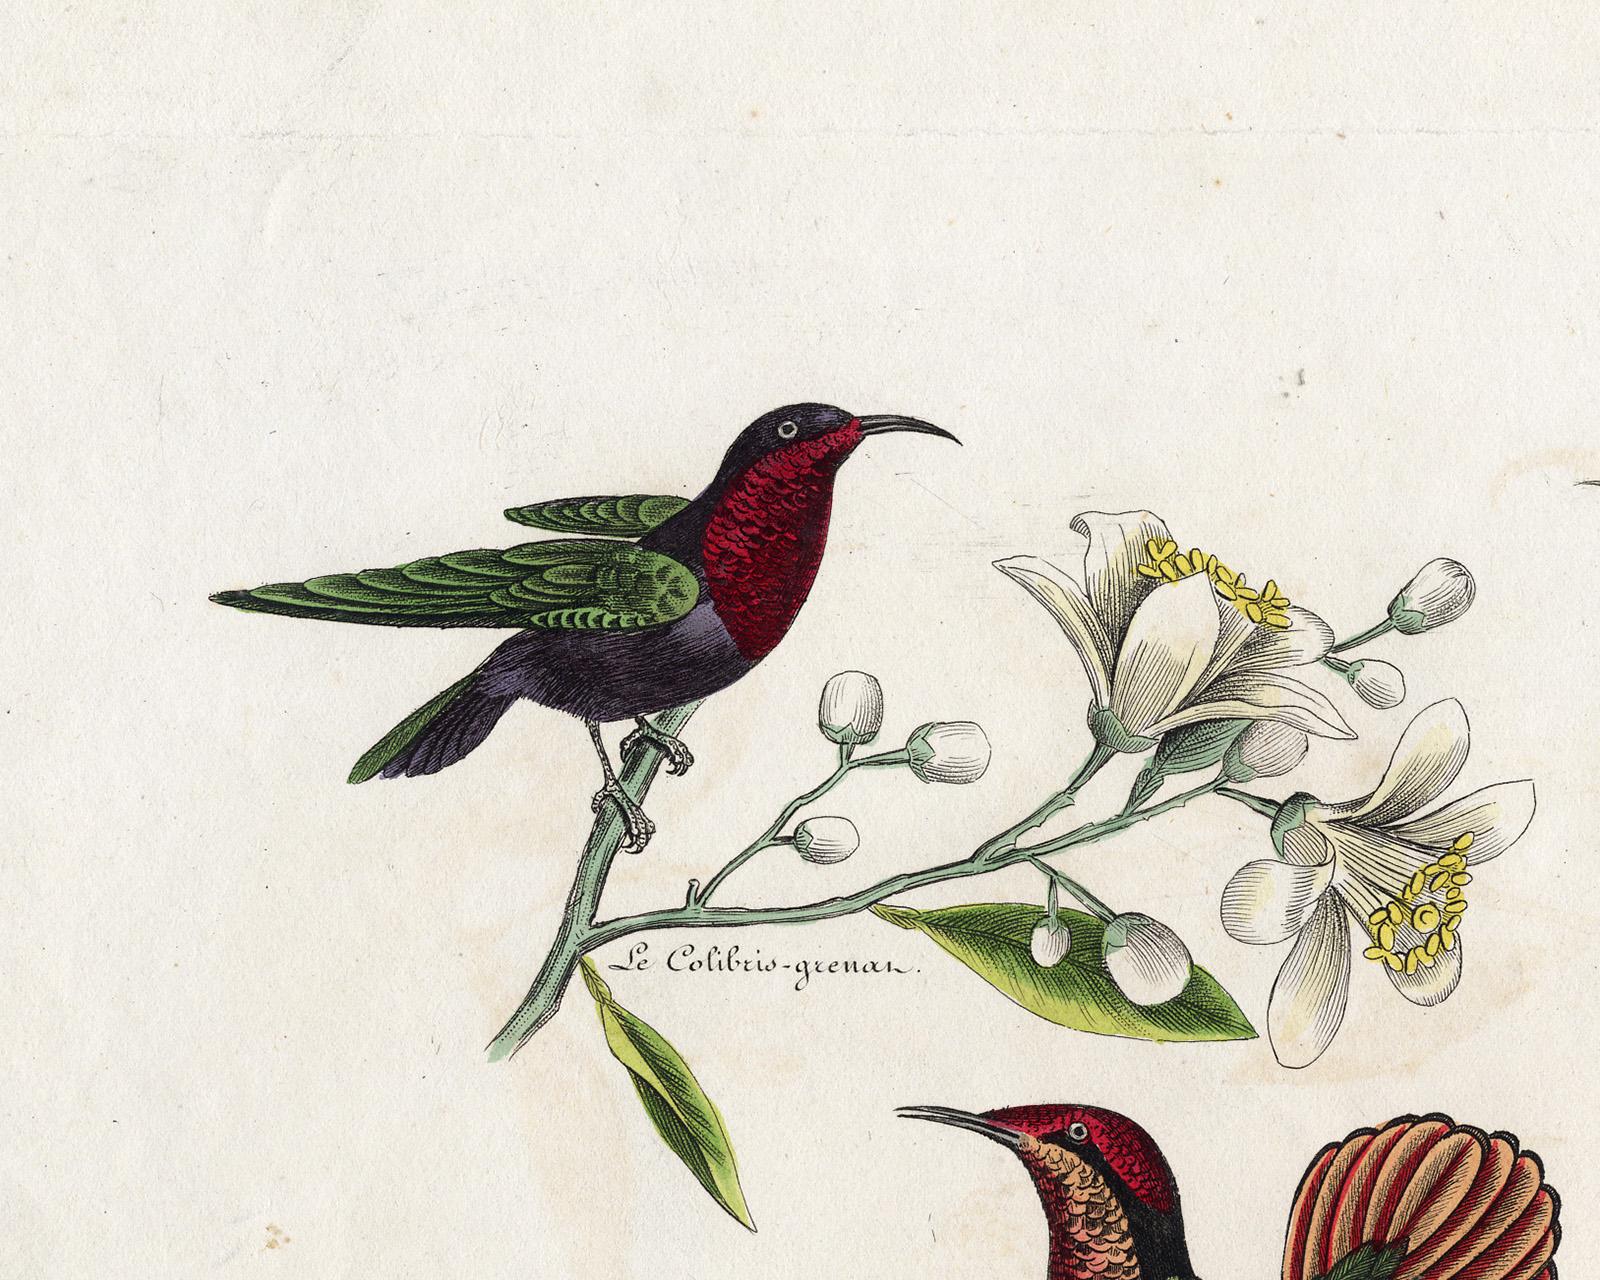 Three different Hummingbirds by Pauquet - Hand coloured engraving - 19th century - Old Masters Print by Hippolyte Louis Emile Pauquet and Polydore Pauquet